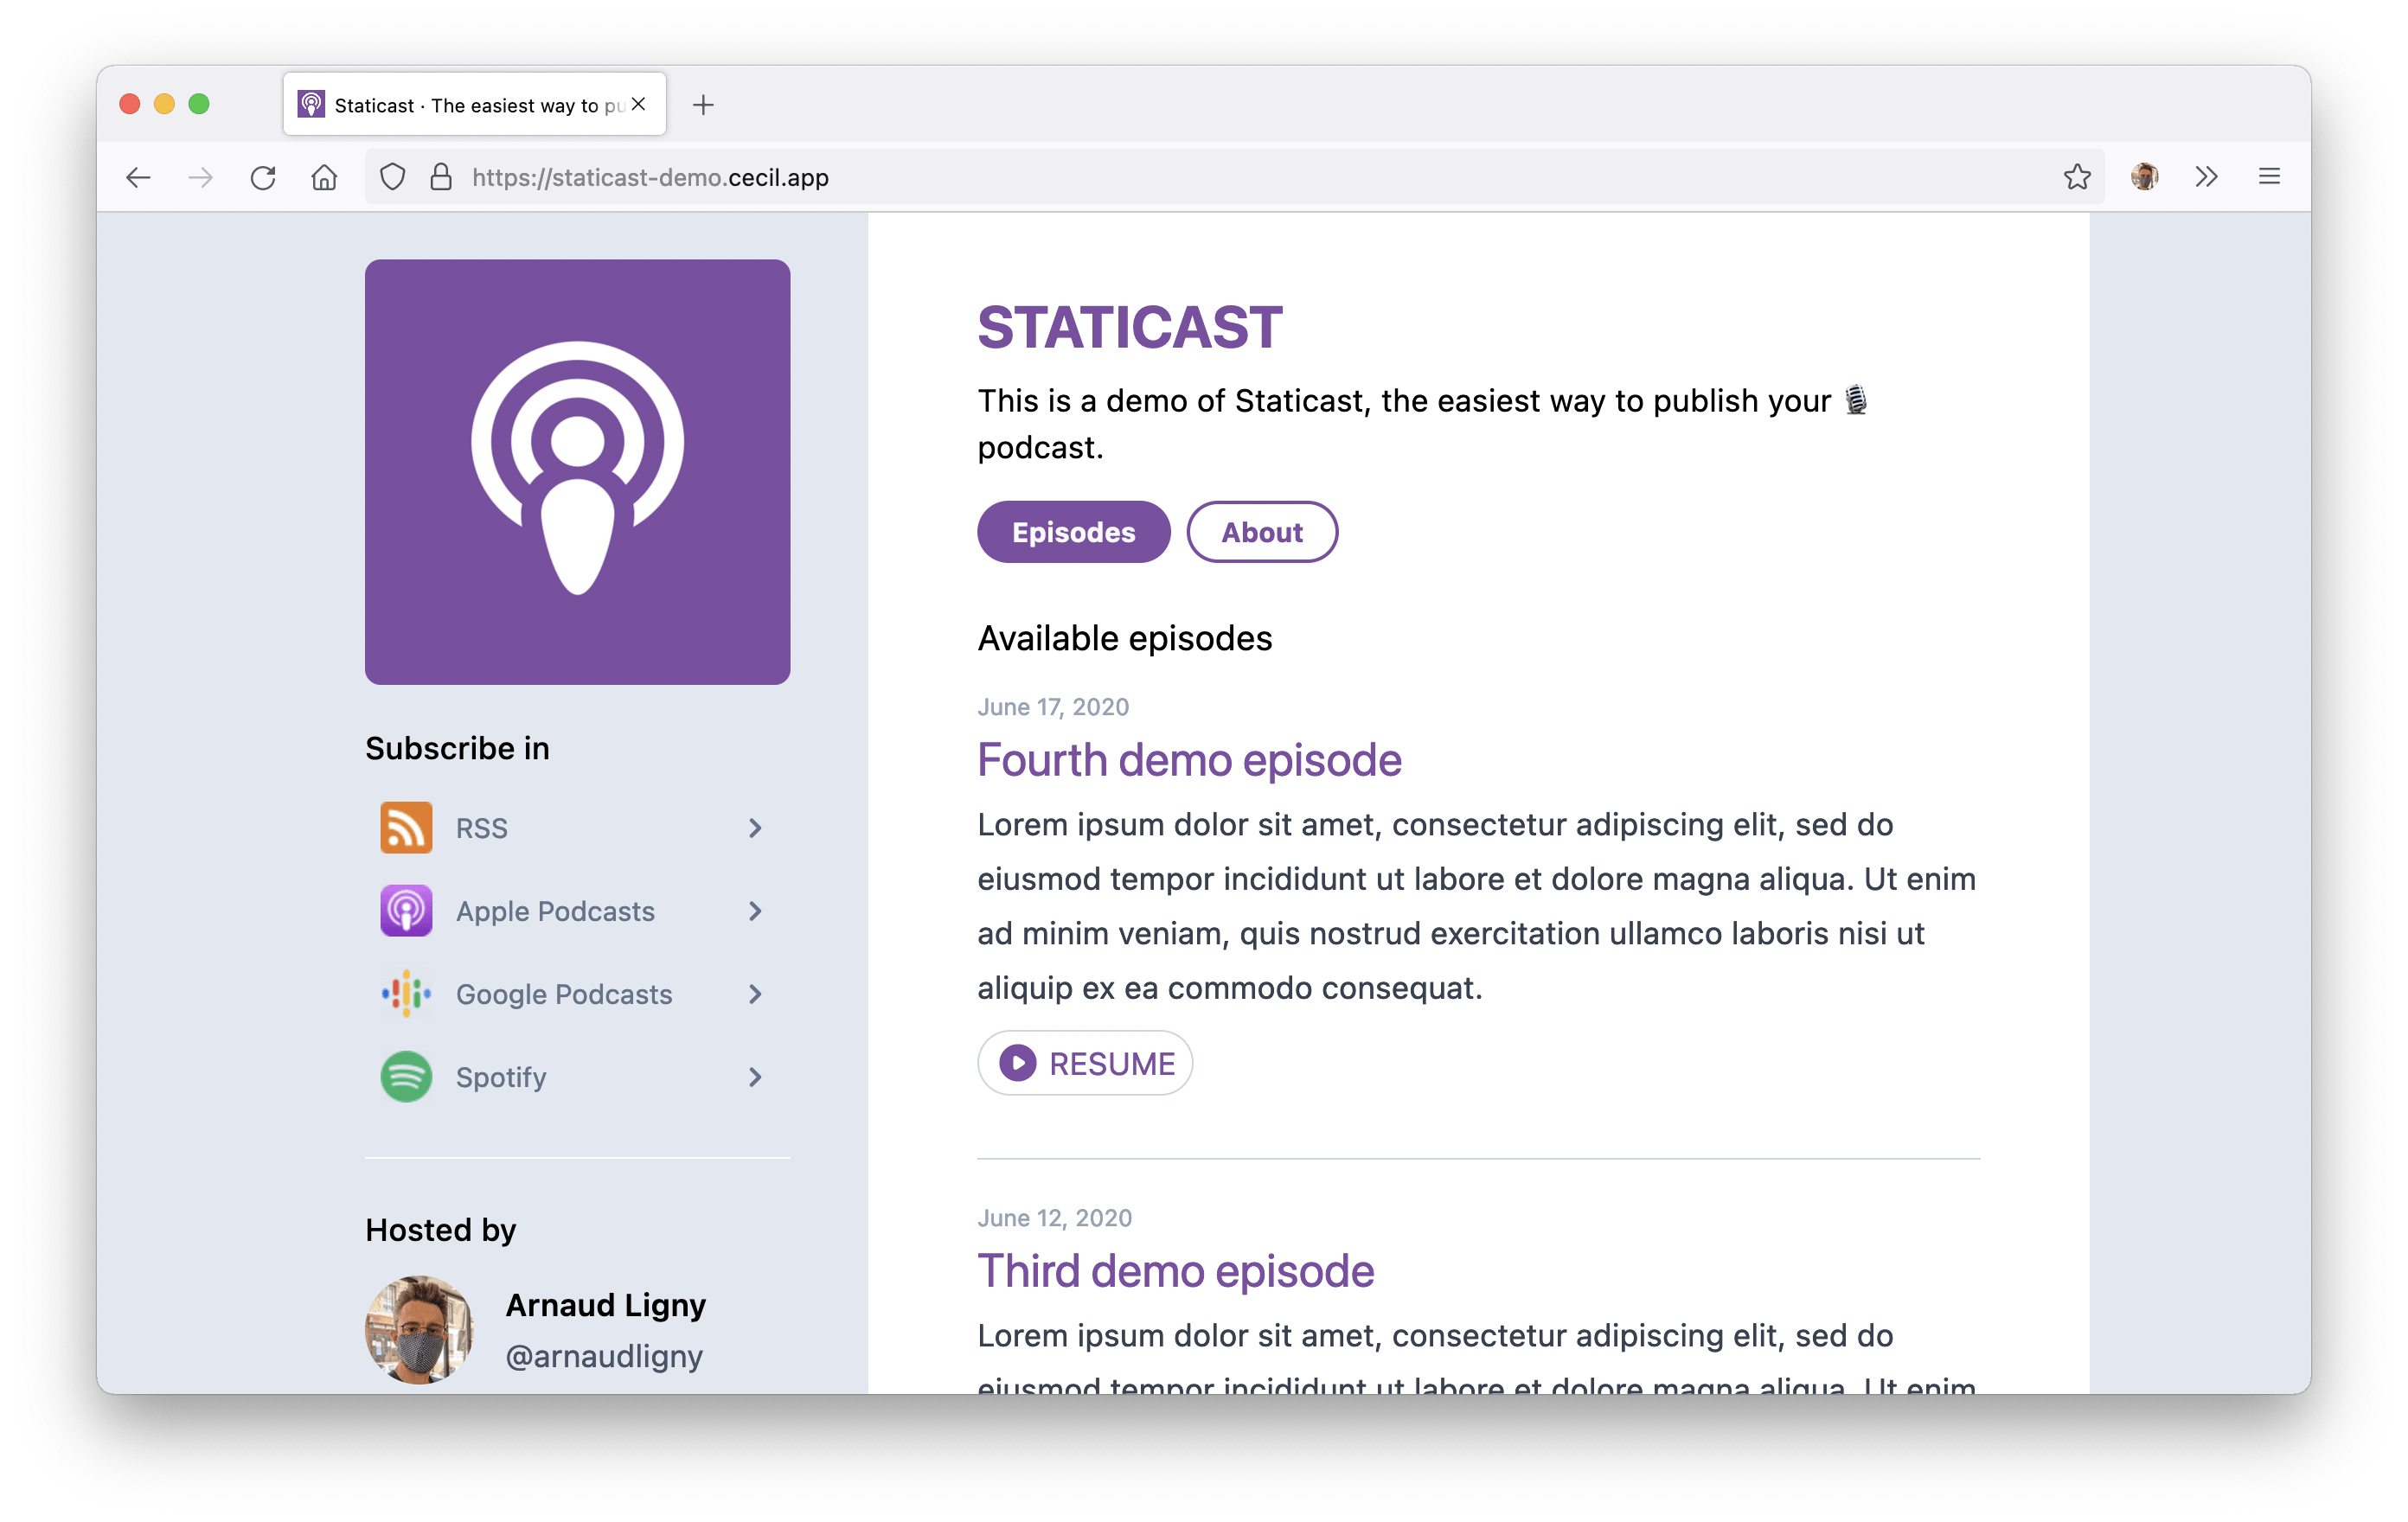 Broadcast your podcast simply